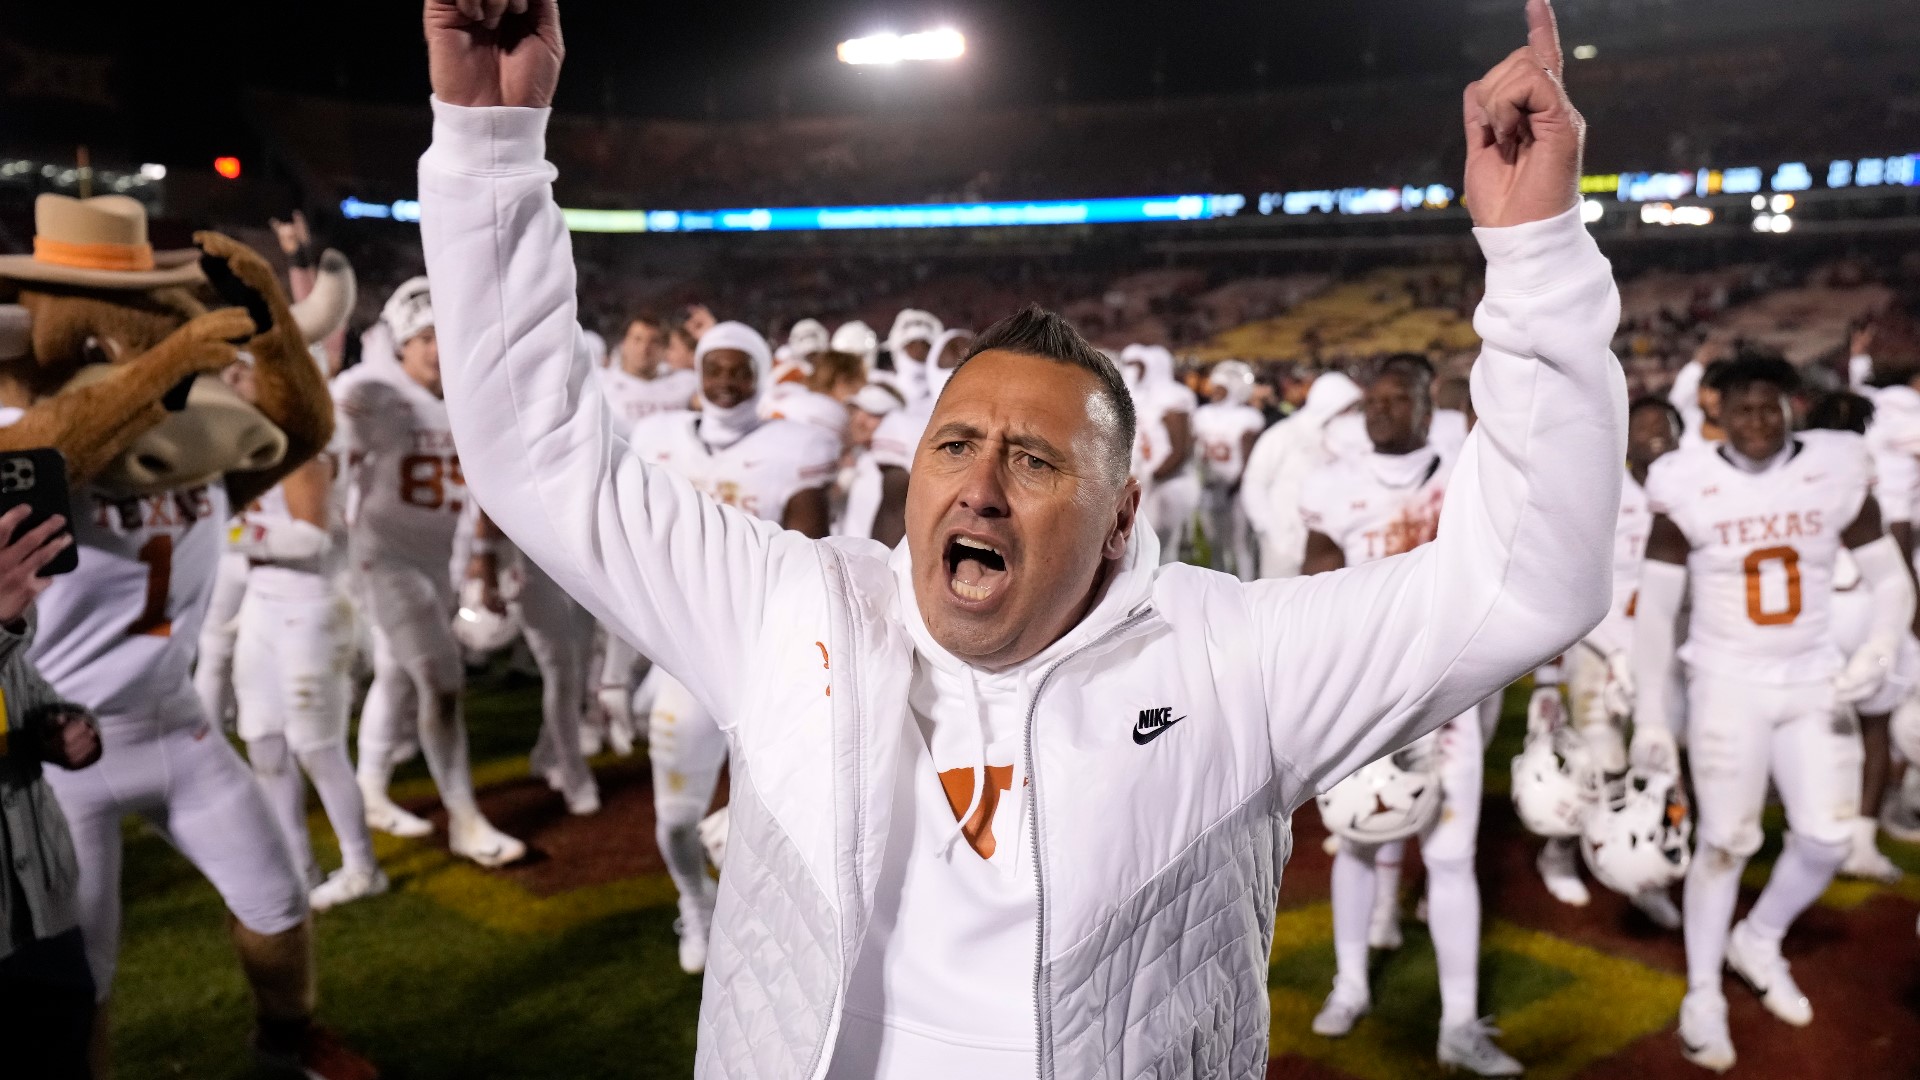 The proposed terms of the contract would make Sarkisian among the top paid coaches in all of college football.